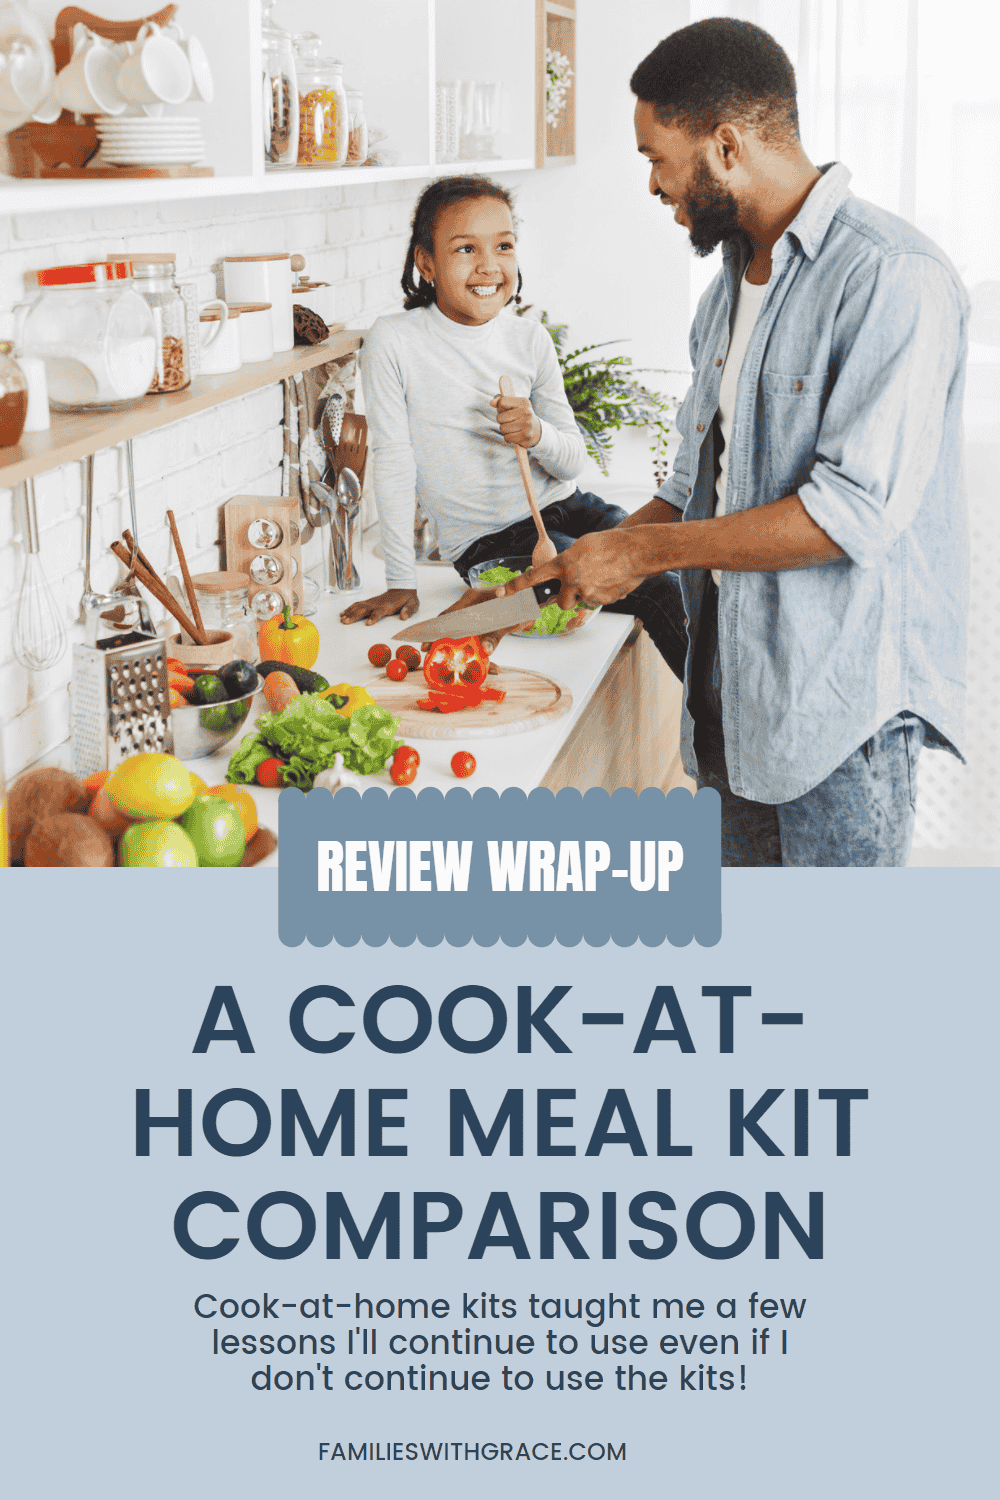 Meal kit reviews: What I learned about cook-at-home kits